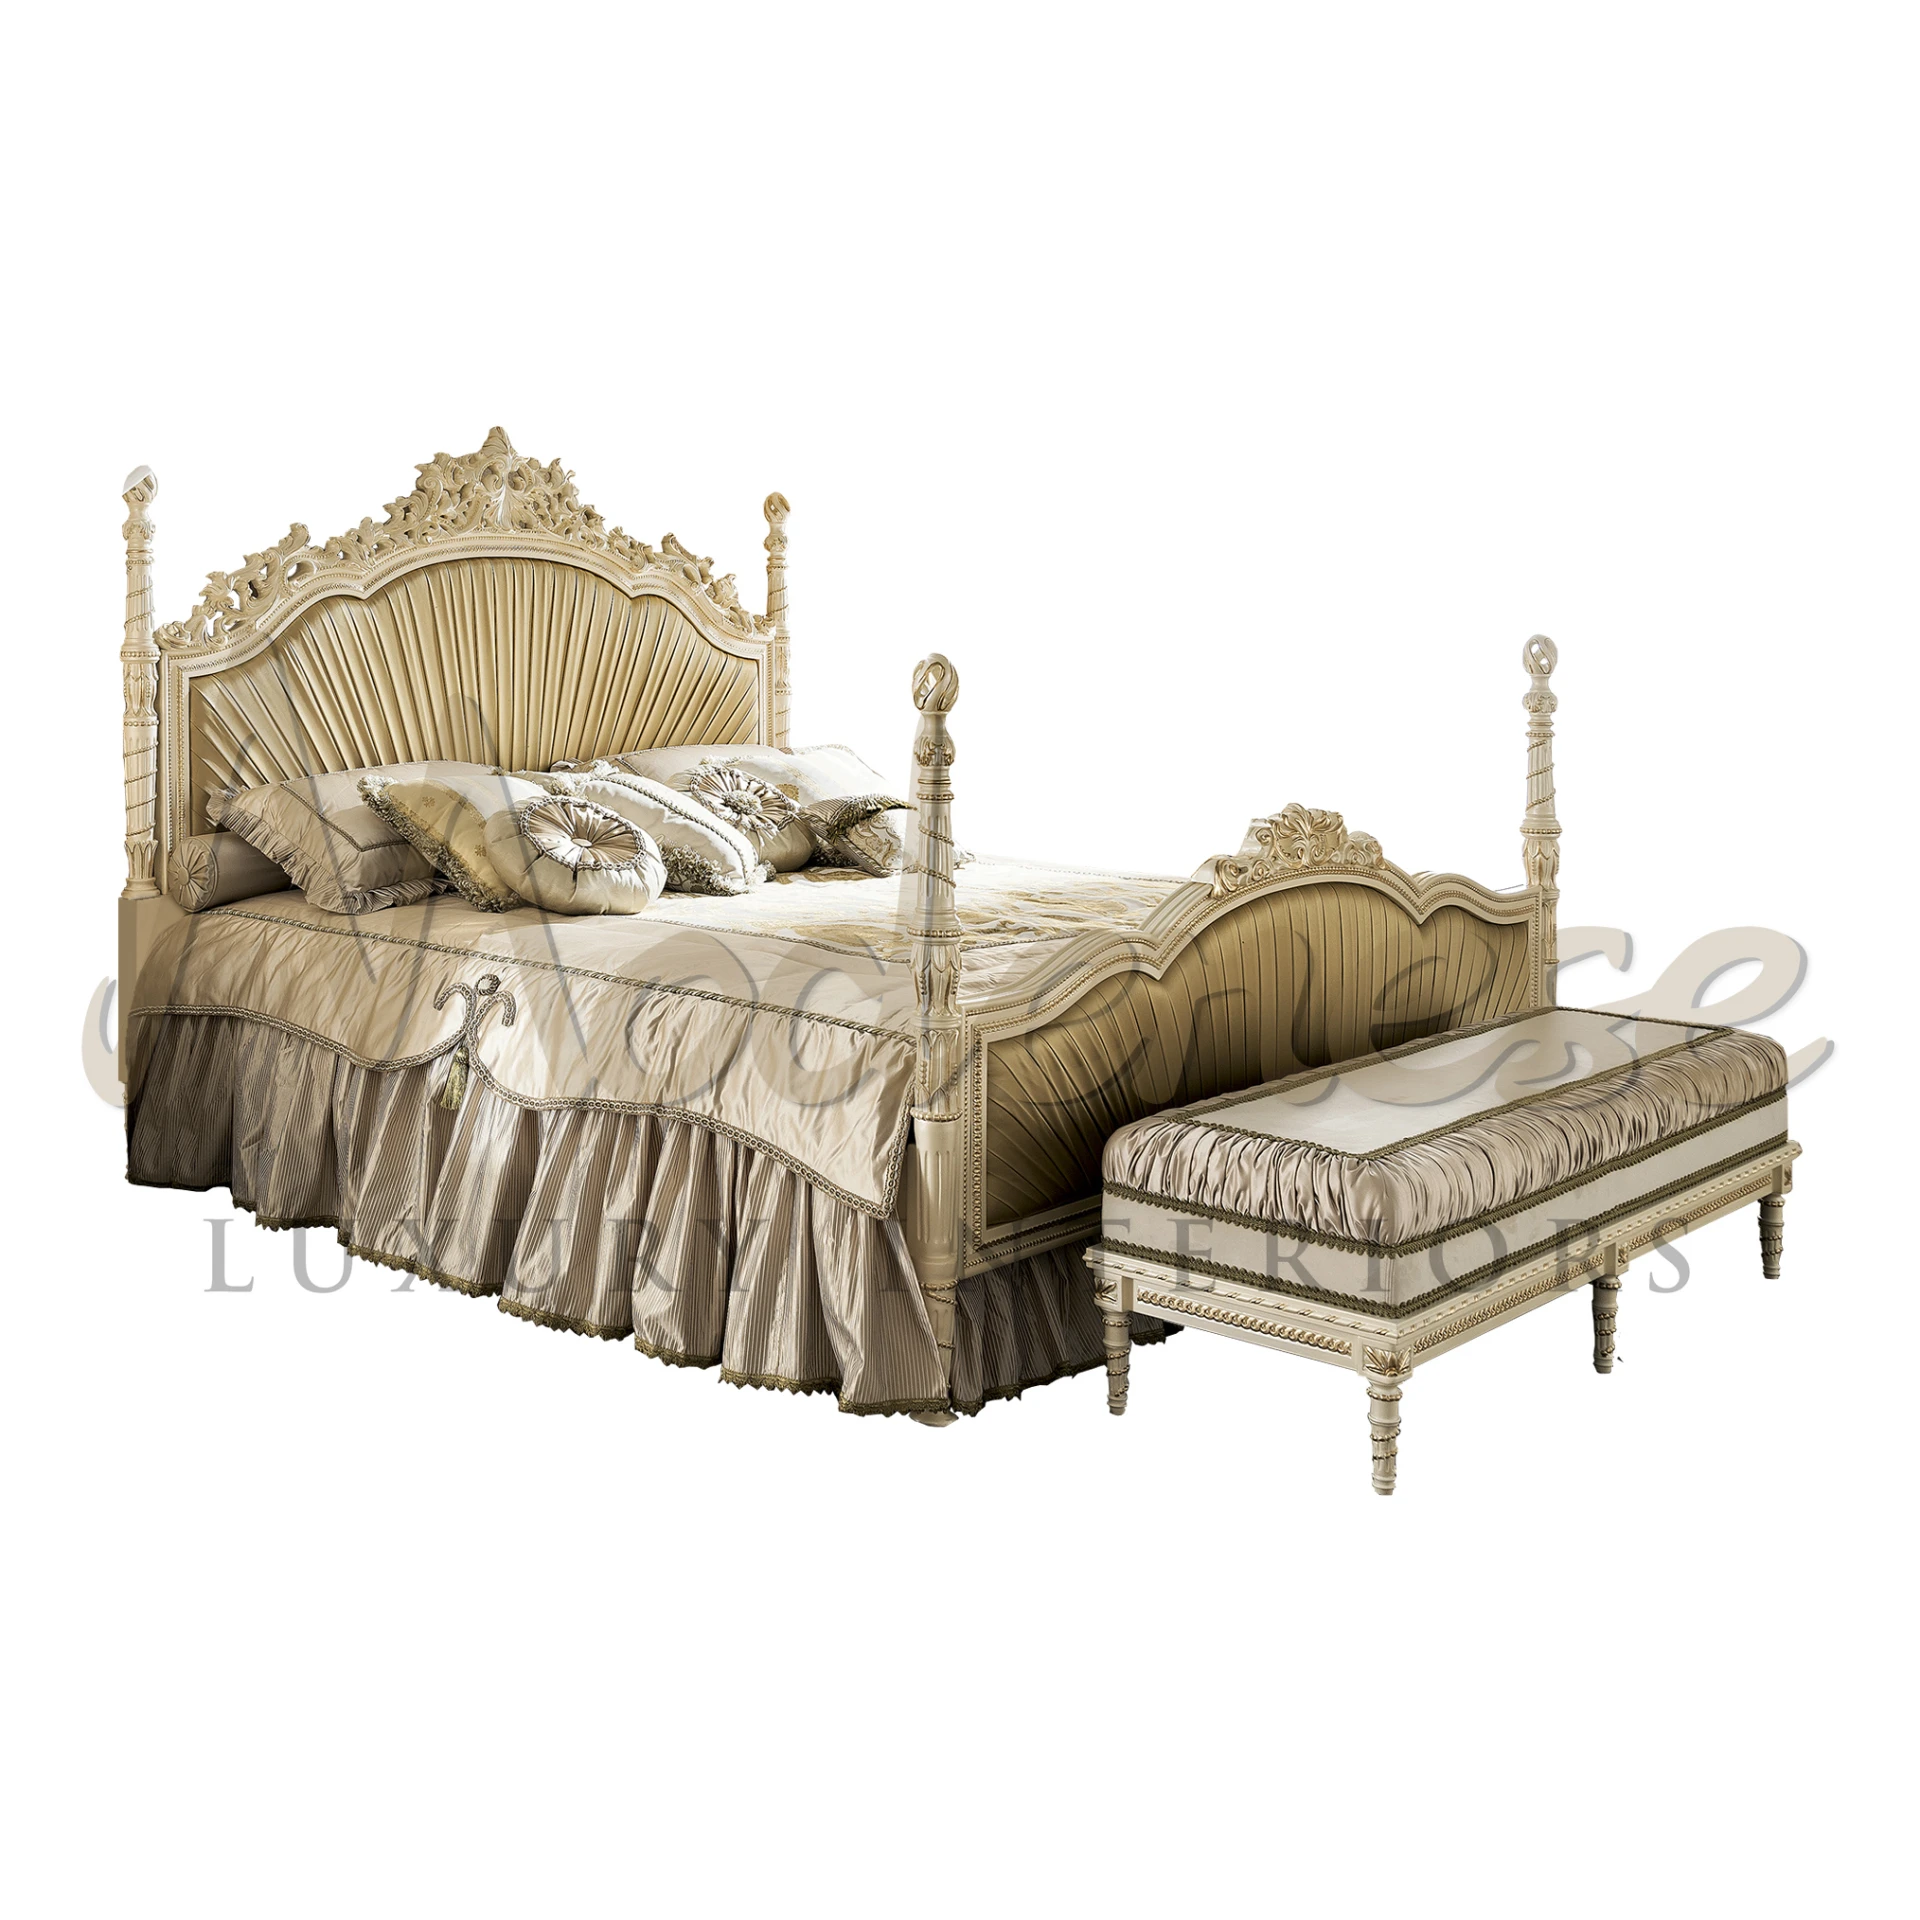 An exquisite beige double bed with detailed carvings on the headboard and footboard, complemented by an elegant matching bench at the foot, all featuring luxurious drapery and plush bedding.